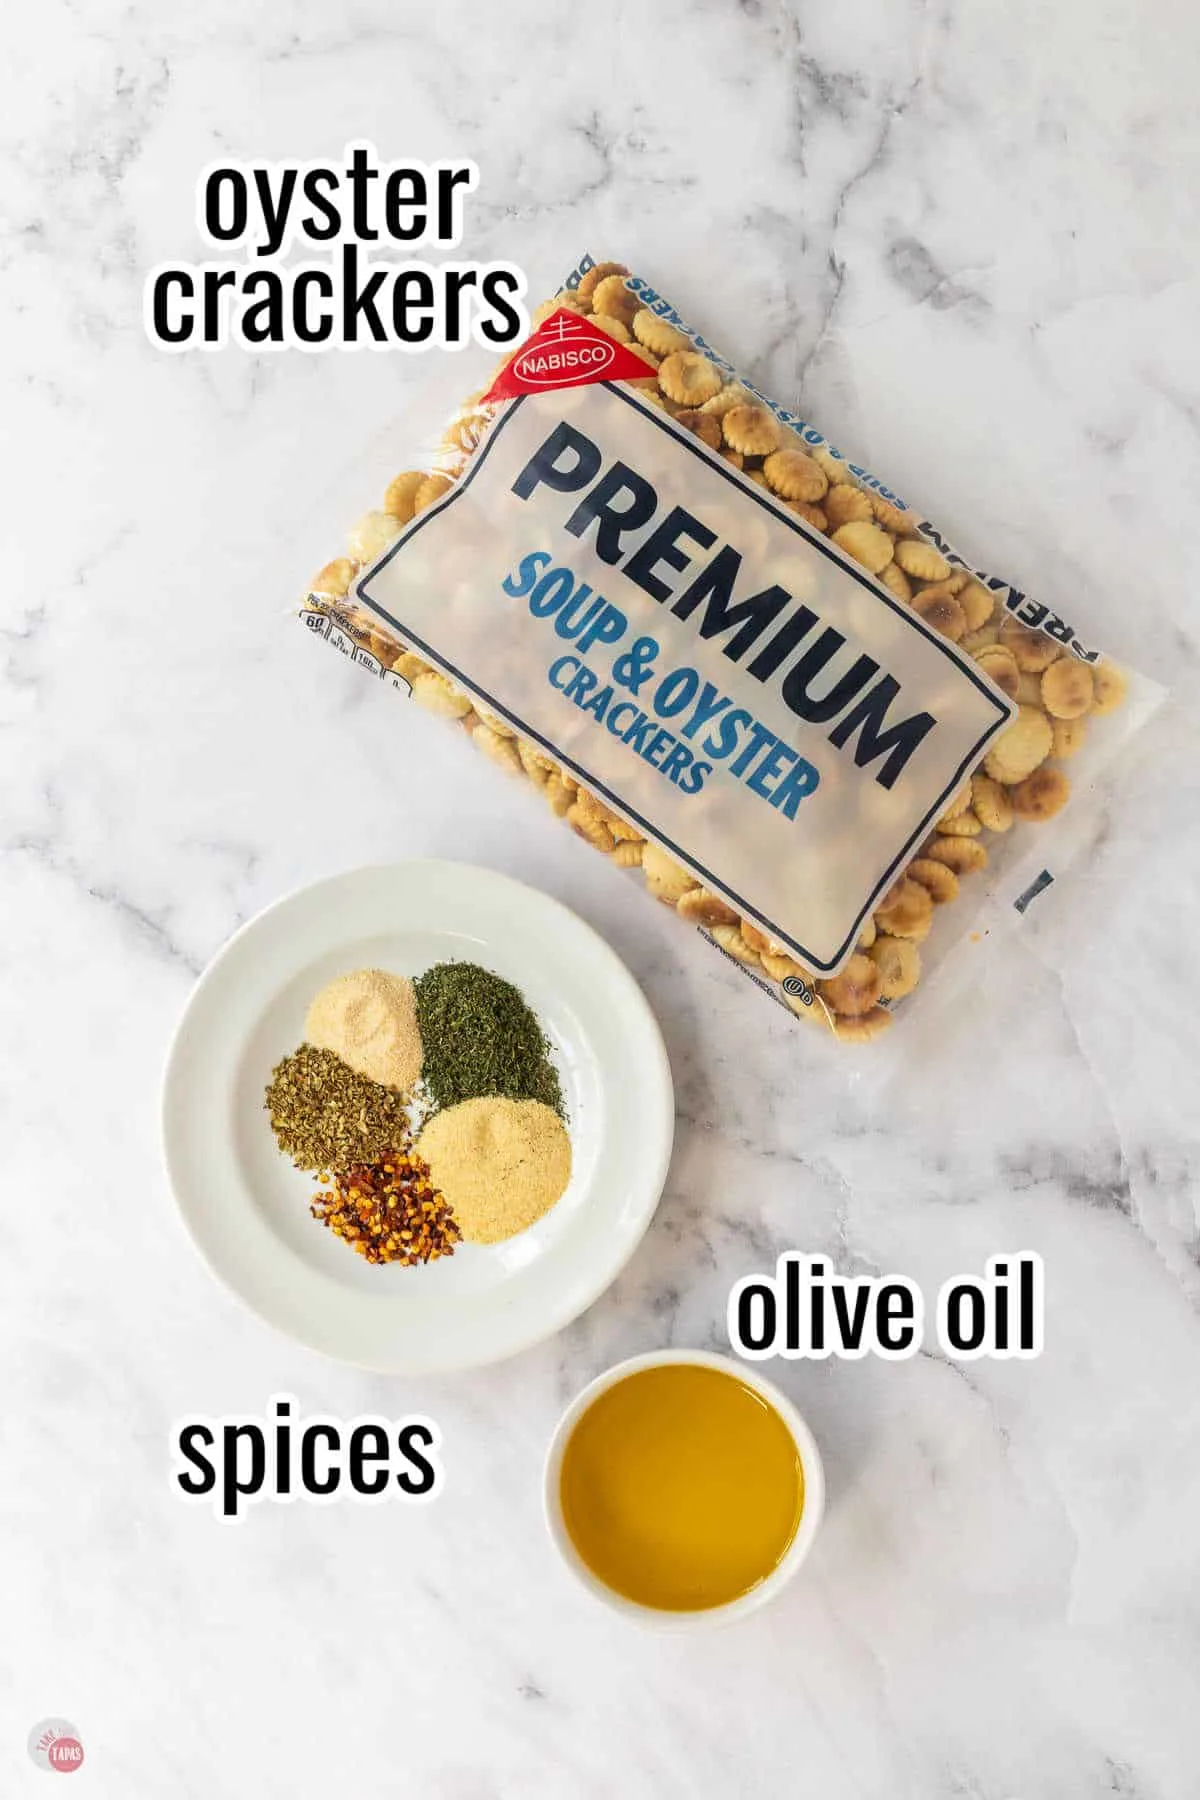 ranch oyster cracker ingredients